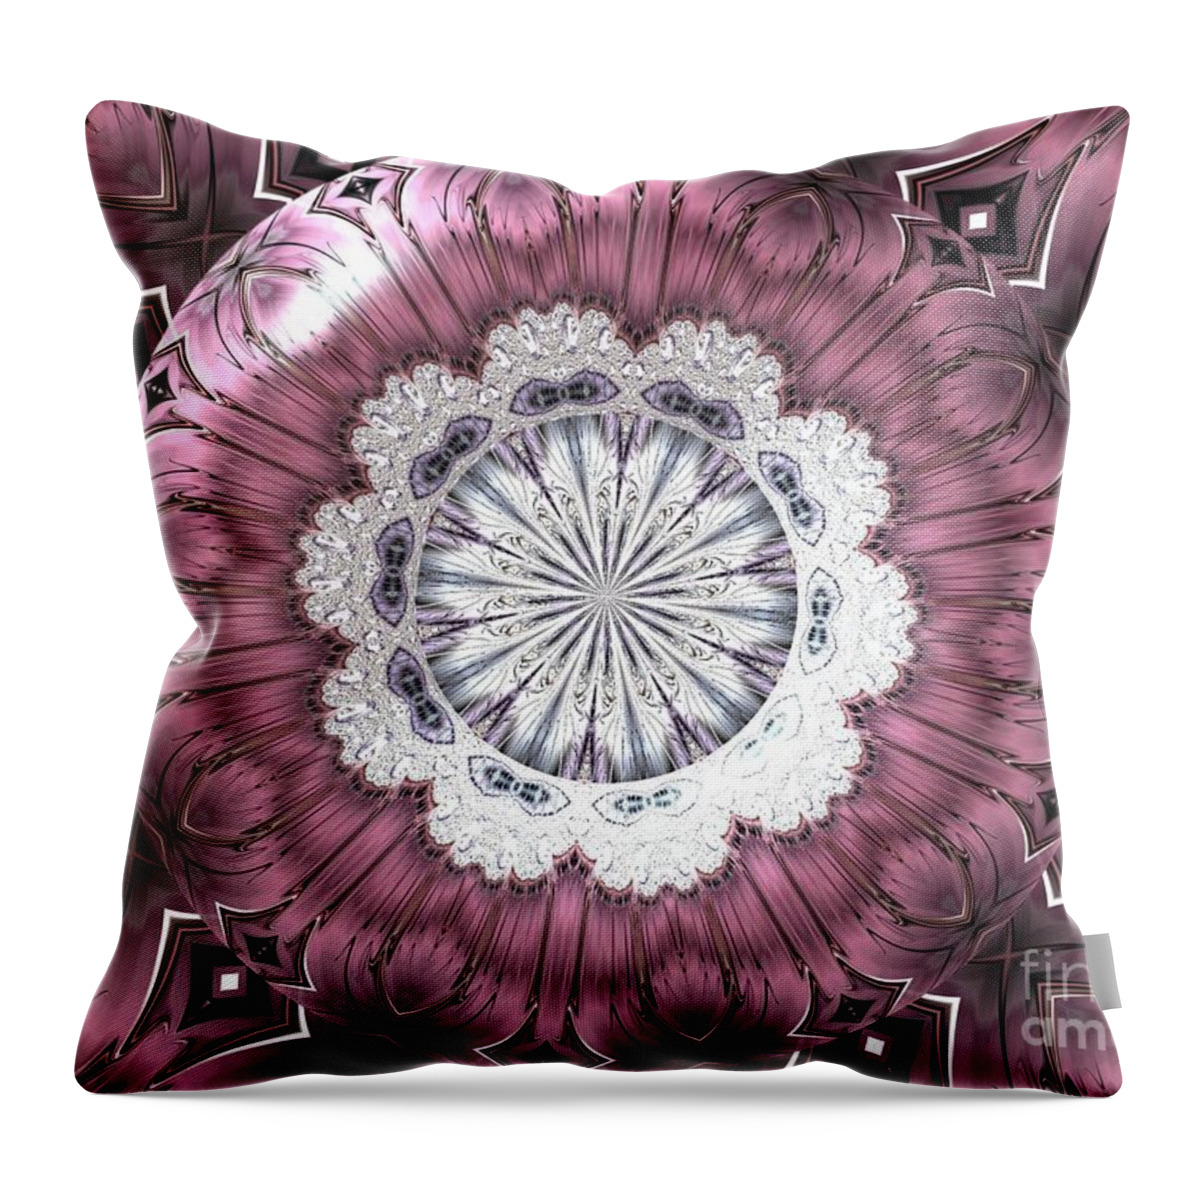 Bejeweled Royal Purple Diadem Fractal Abstract Throw Pillow featuring the digital art Bejeweled Royal Purple Diadem Fractal Abstract by Rose Santuci-Sofranko